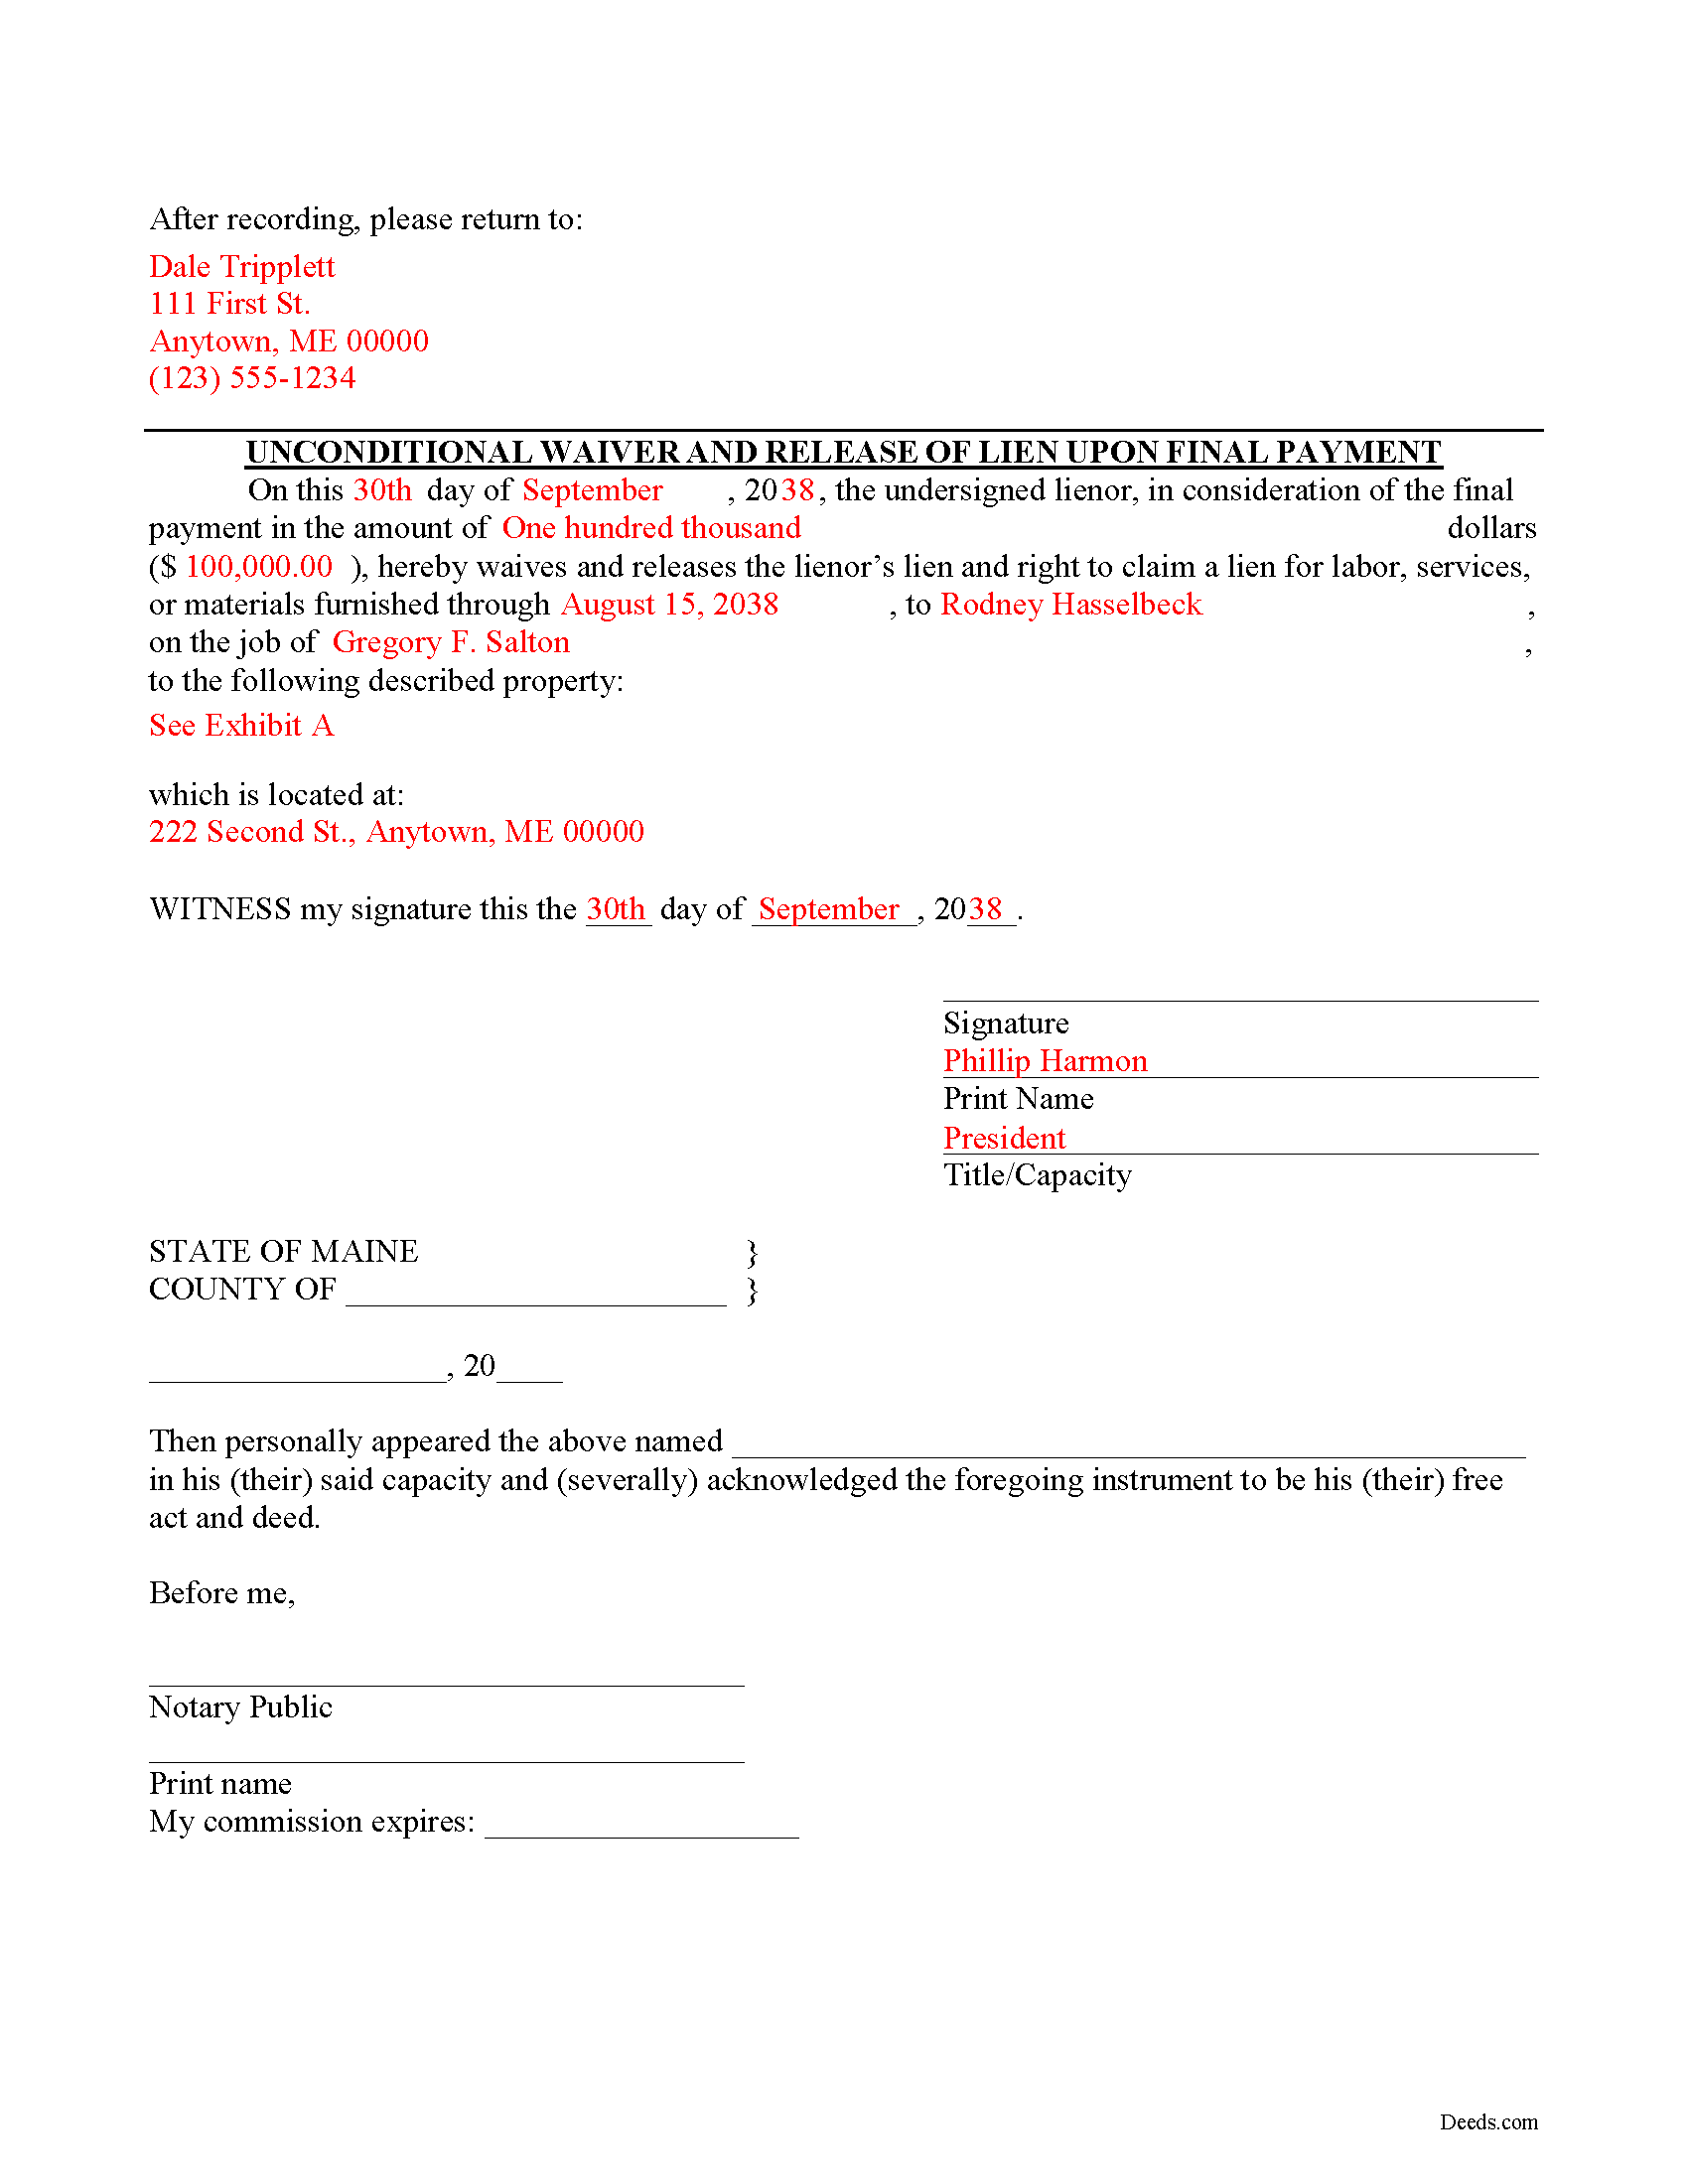 Completed Example of the Unconditional Lien Waiver on Final Payment Document